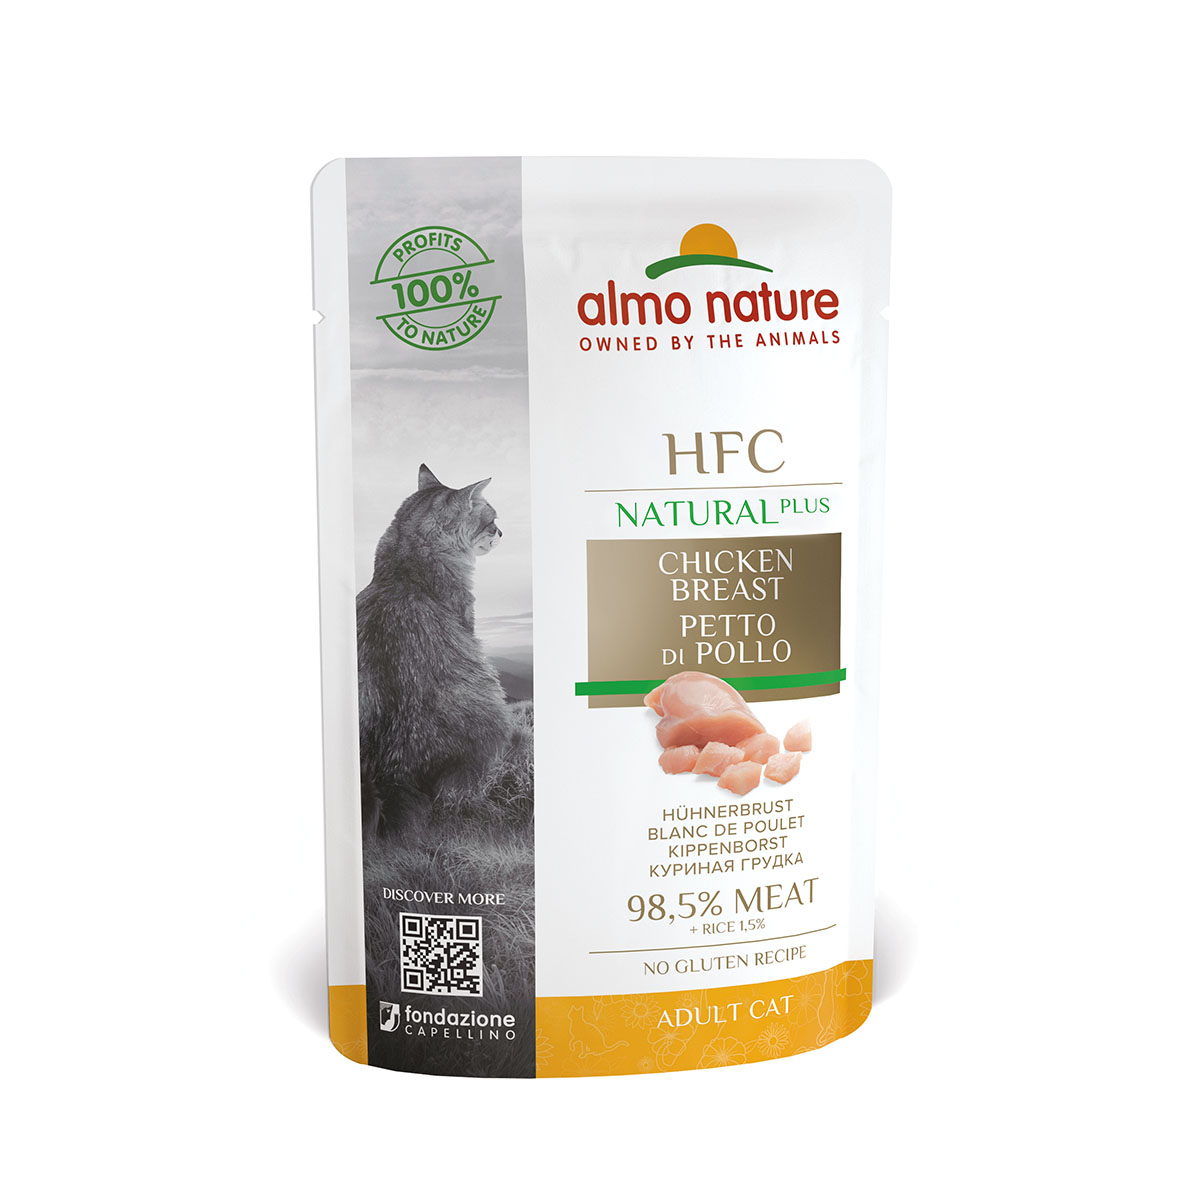 Almo Nature HFC Natural Plus Hühnerbrust 24x55g